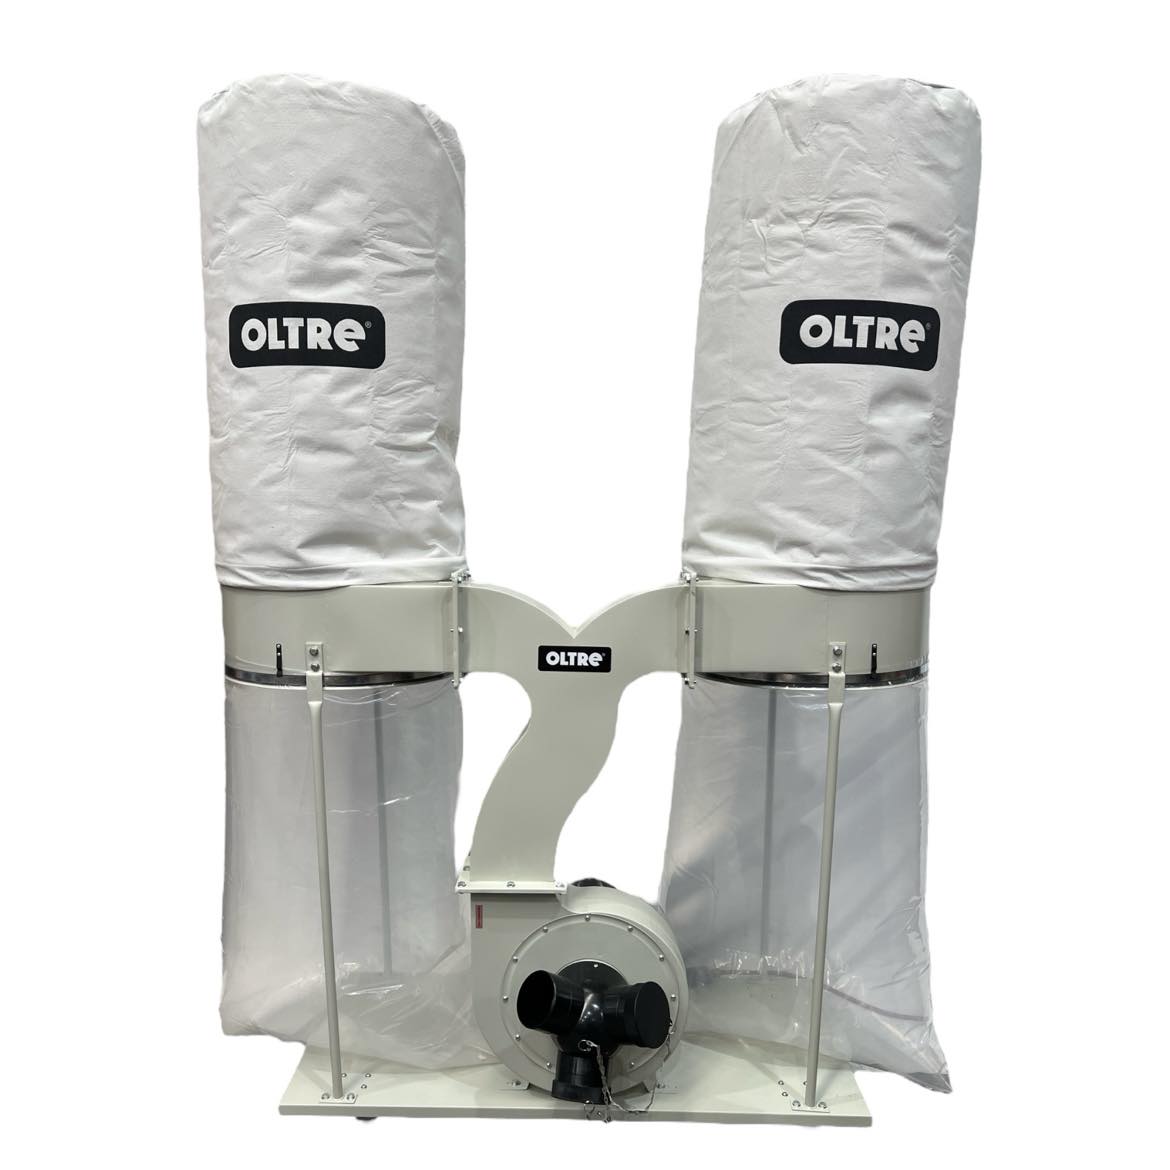 Dust Collector 415V 5HP 2 x Filter Element (2 Needlefelt Top Bags & 2 Plastic Bottom Bags) OT-DC-3800-415 by Oltre